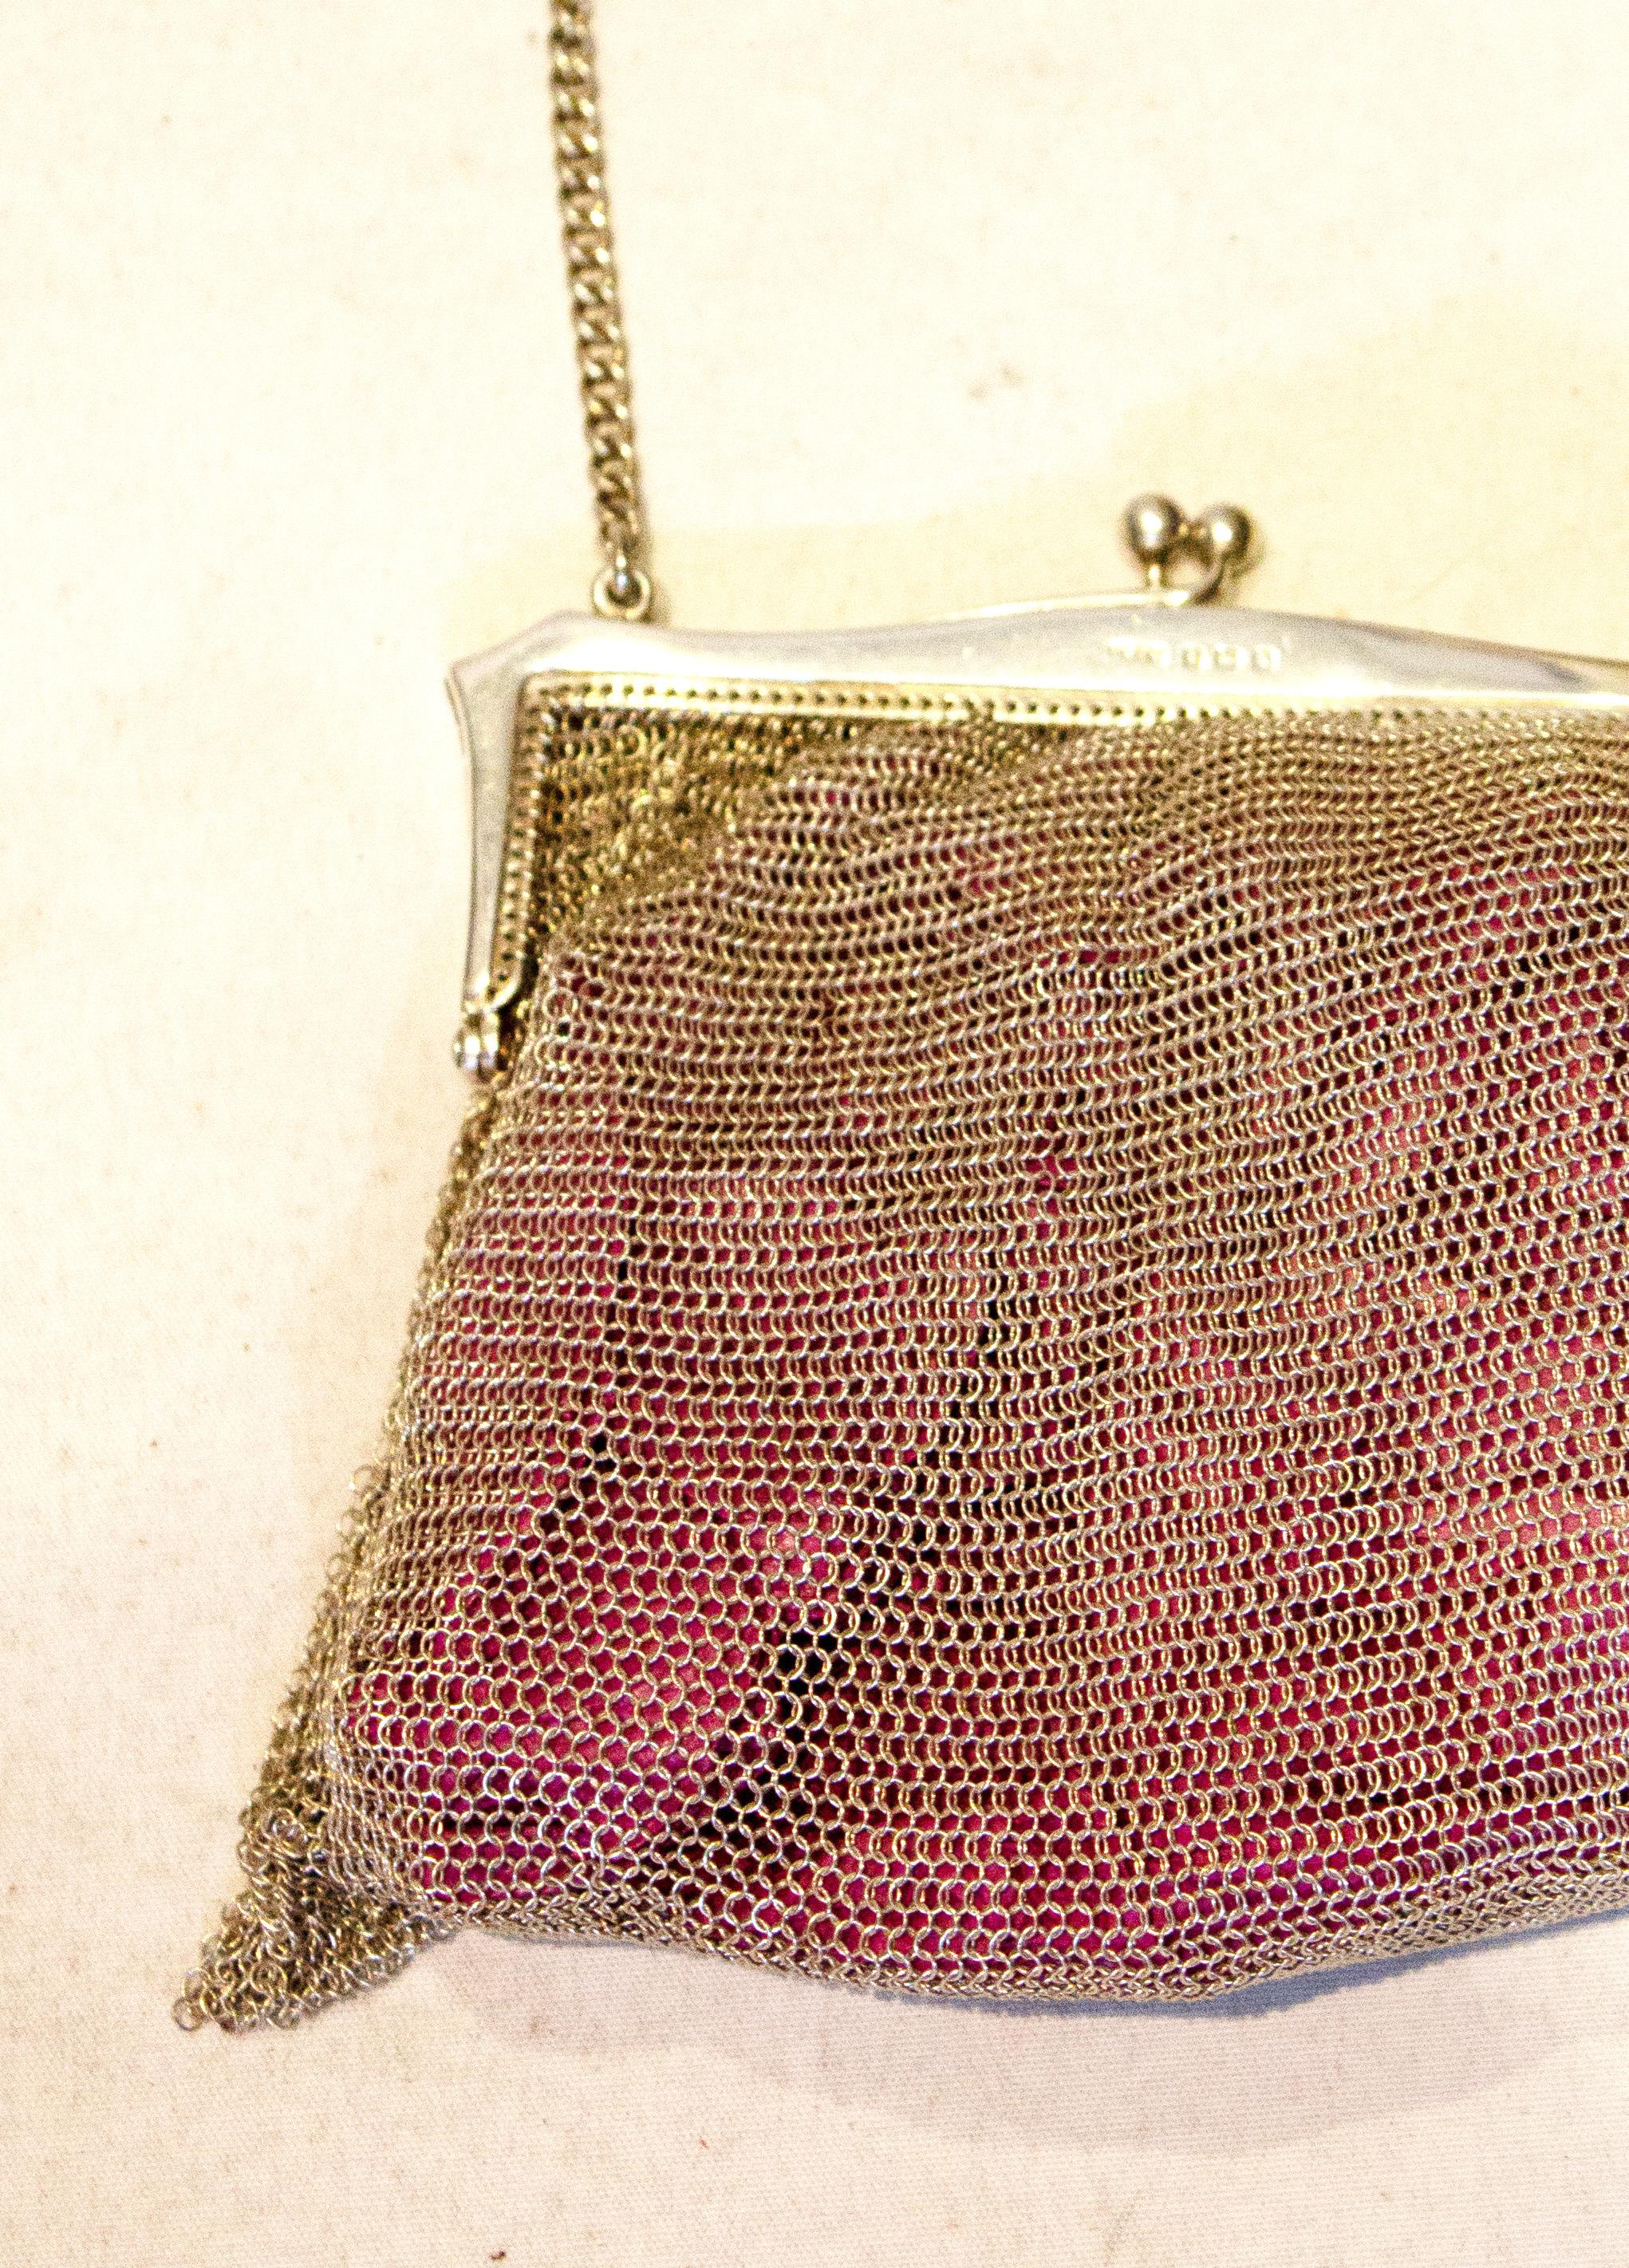 A pretty  sterling silver vintage handbag, hallmarked Birmingham 1922. The bag has an elegant from and chain handle and measures:  Width 5 1/2'', height 6 1/2''